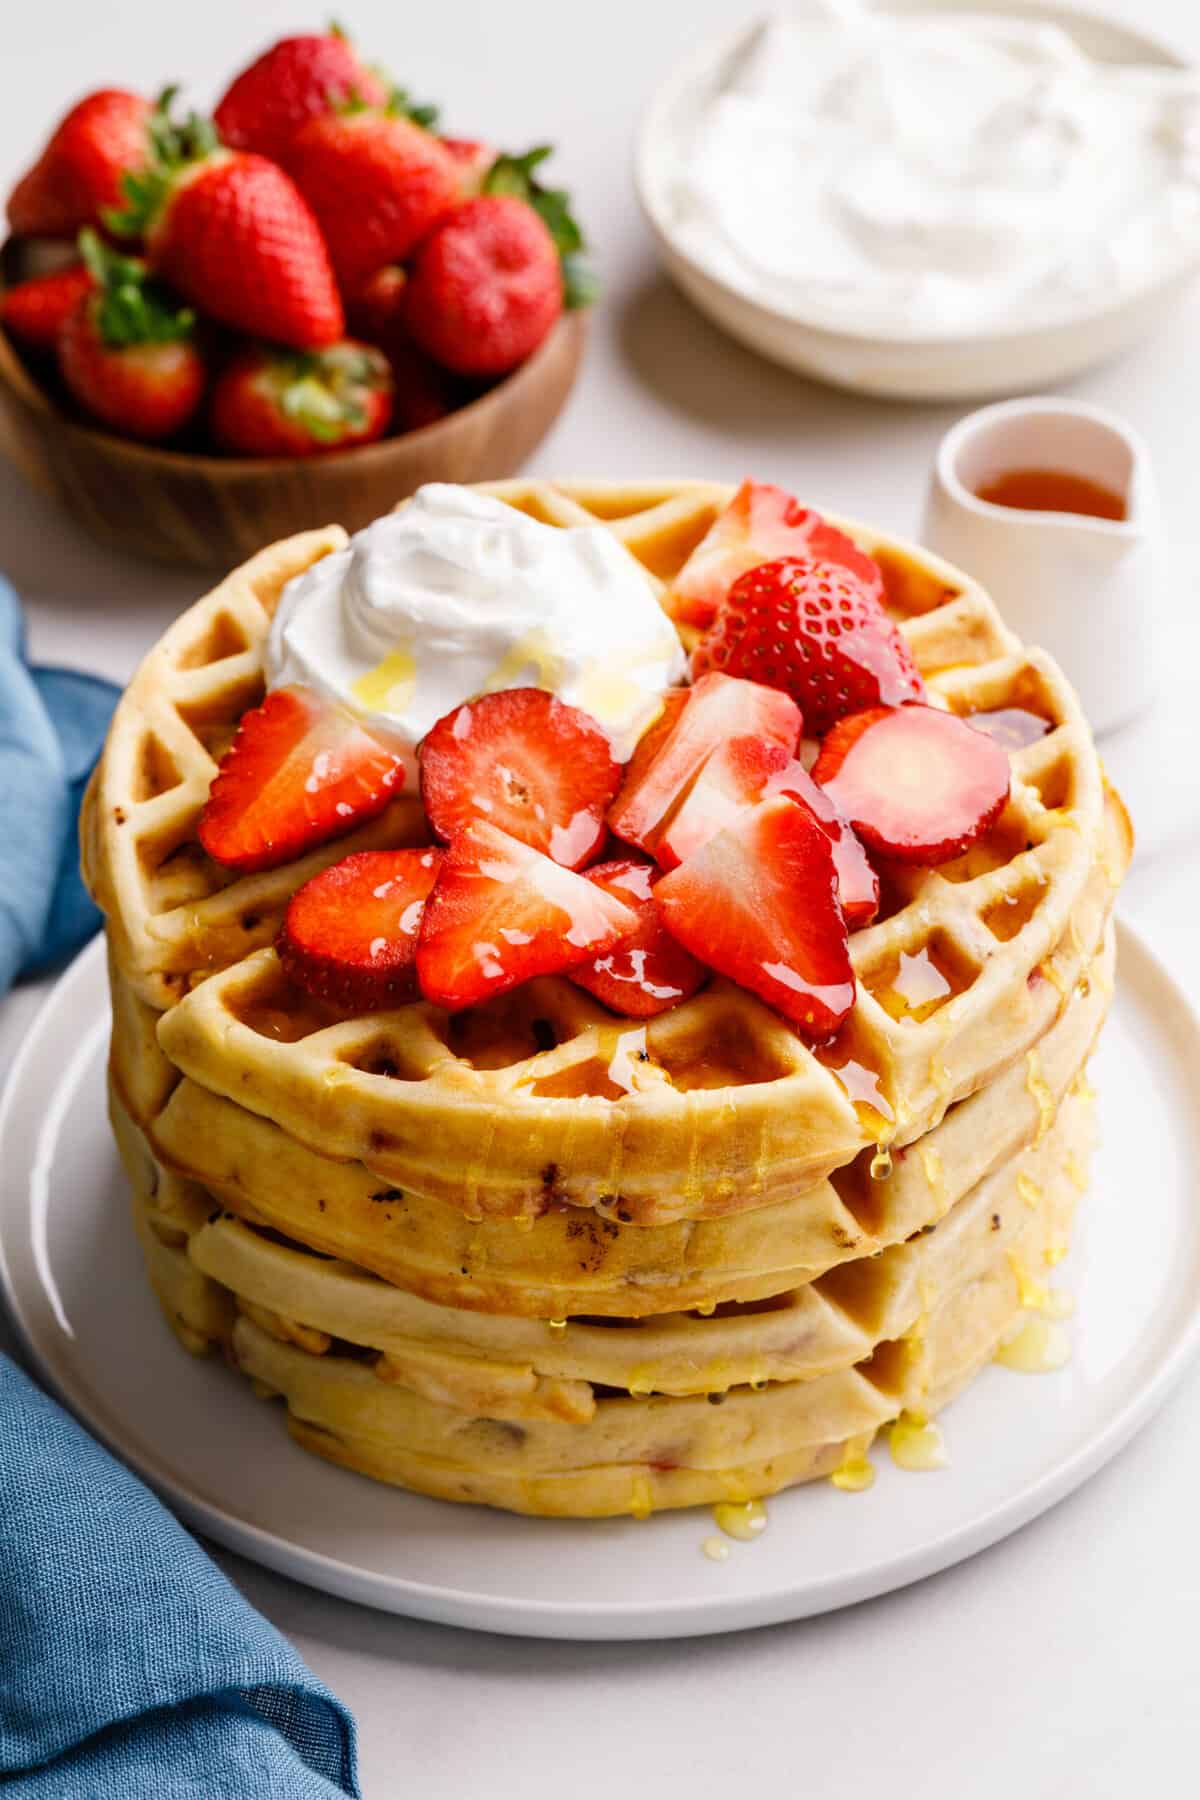 stack of four strawberry waffles topped with syrup, whipped cream and fresh strawberries, served on a white round plate